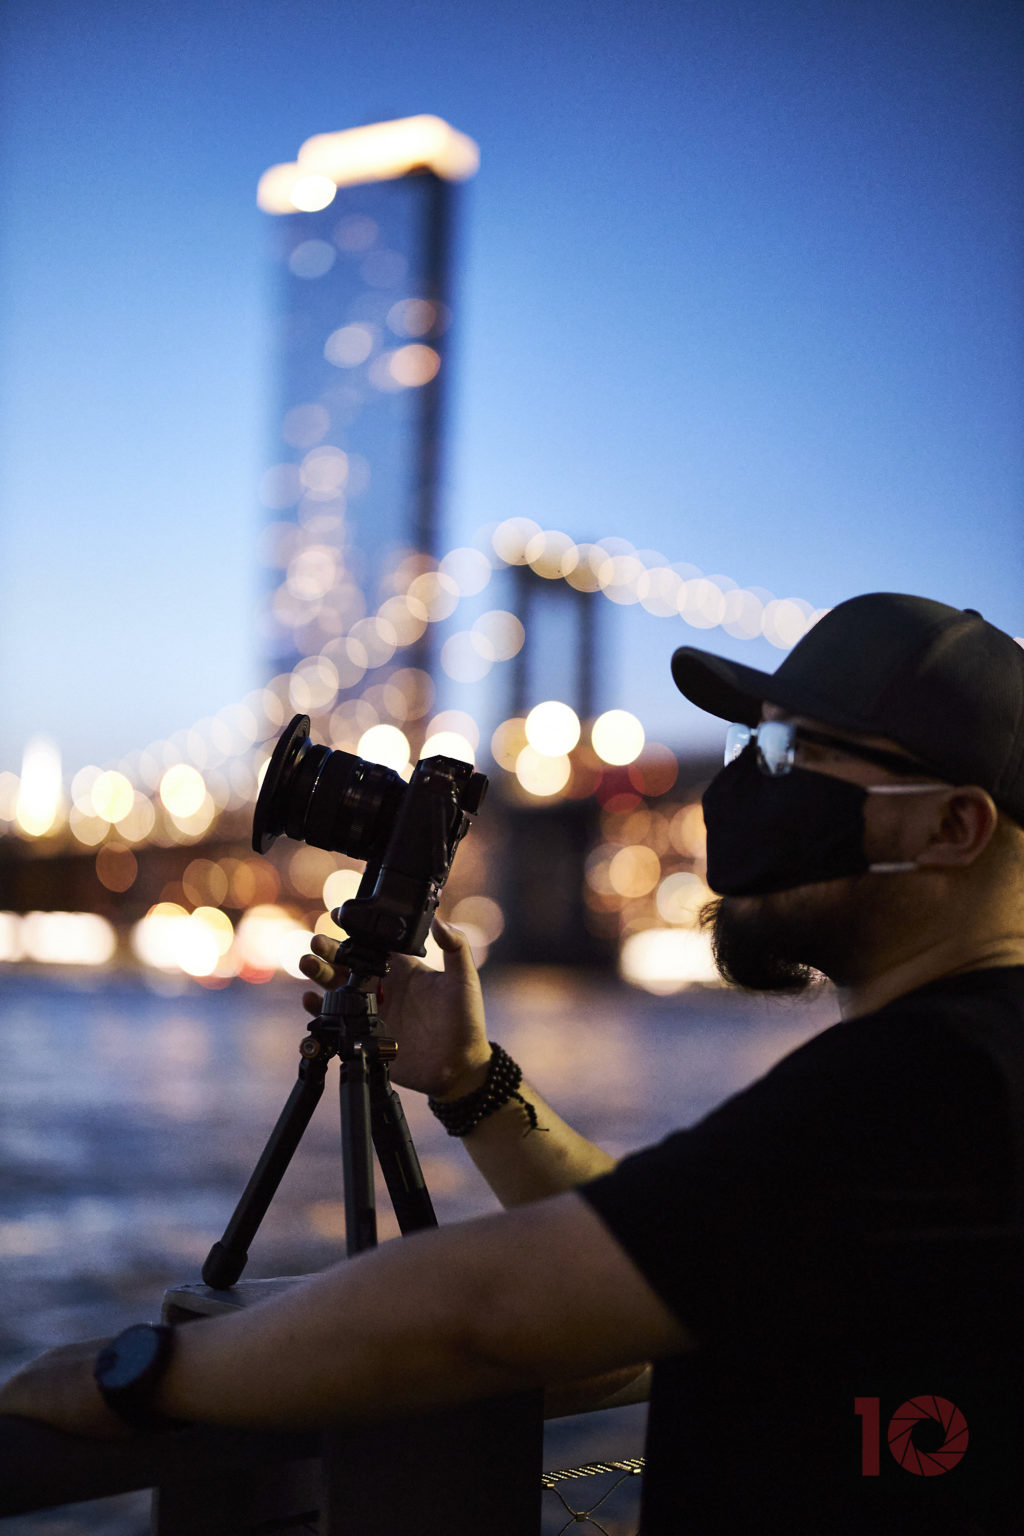 The Phoblographer S Guide To Buying A Tripod And Why You Should